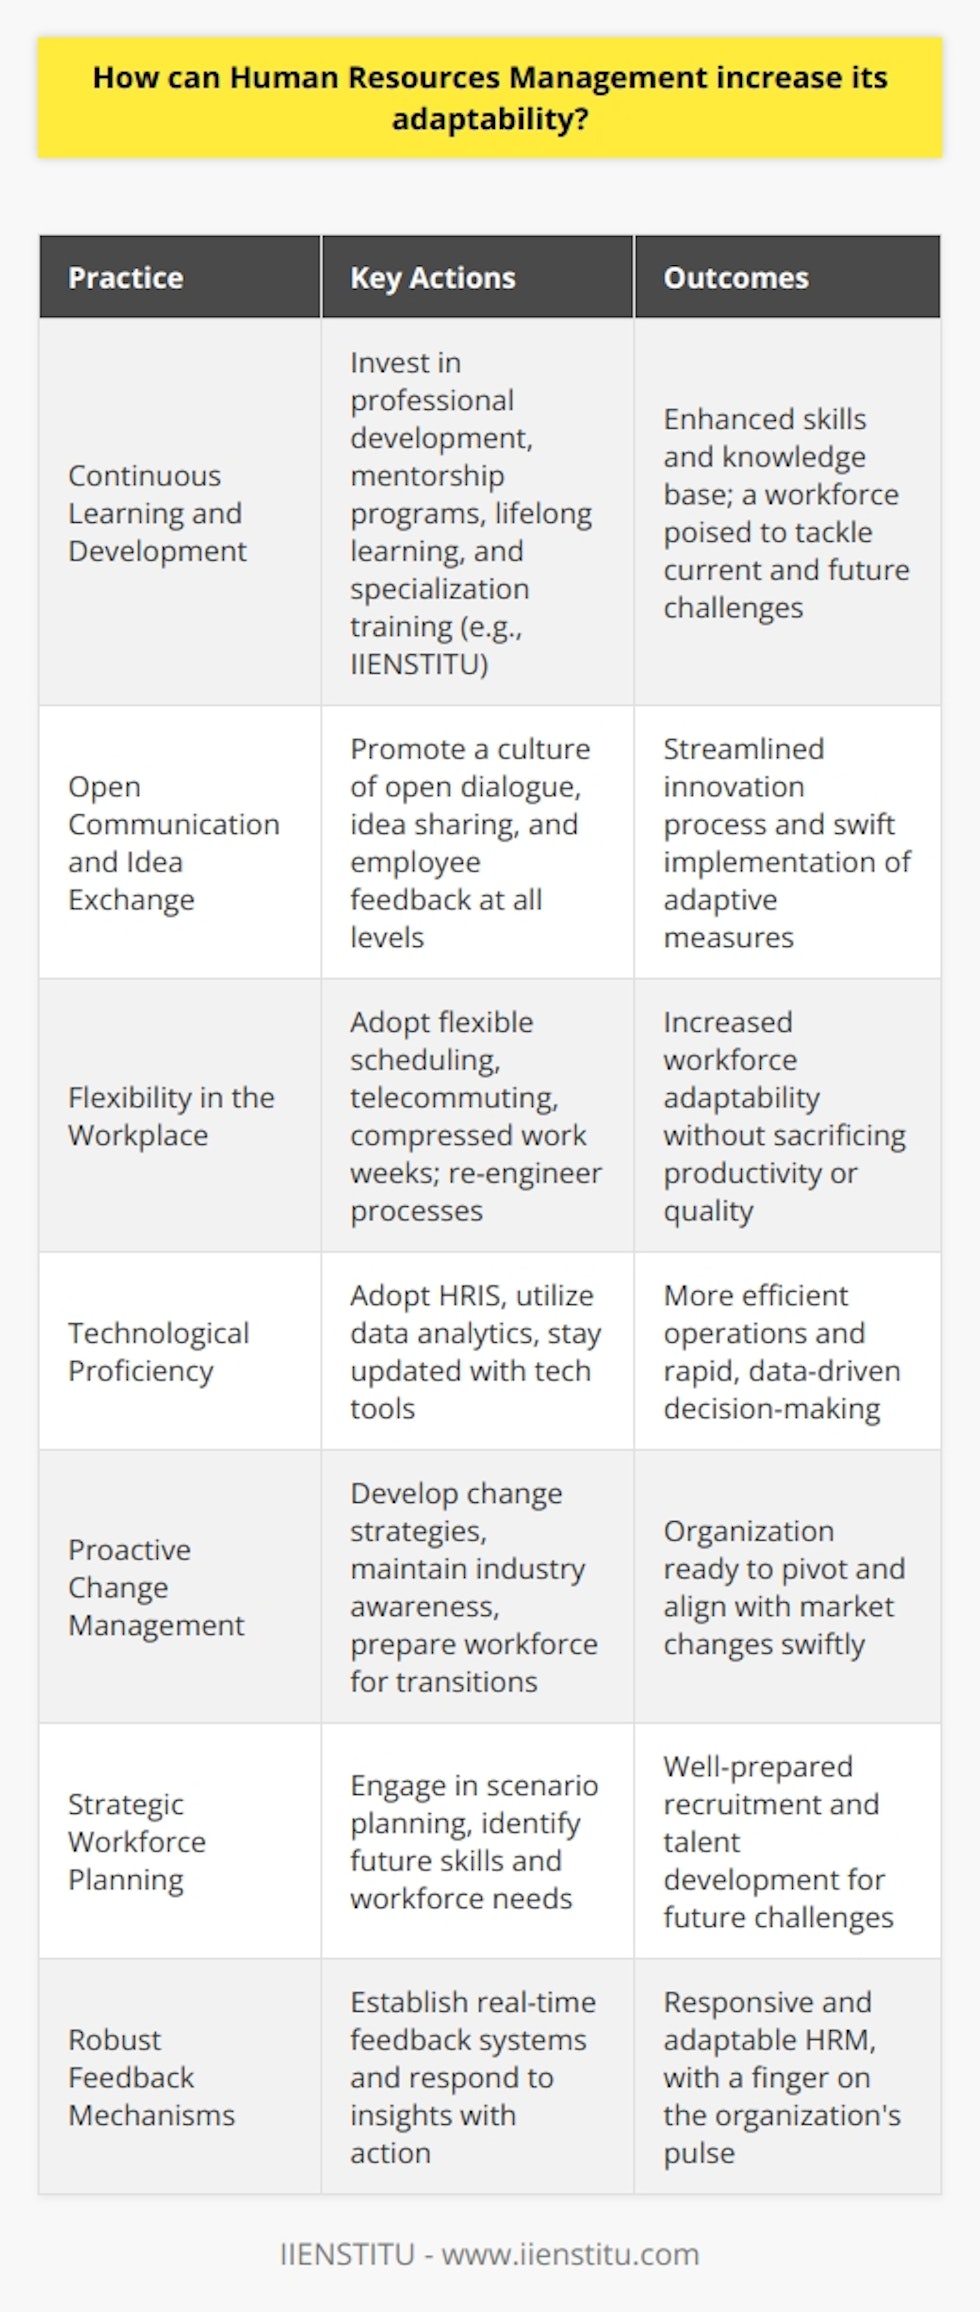 In the realm of Human Resources Management (HRM), adaptability has emerged as a crucial competency given the dynamic nature of the modern business landscape. HRM professionals need to be agile in their approach to navigating the complexities of a fluctuating economy, changing demographics, and rapid technological advancements. Here are several practices that HRM can apply to augment its adaptability.**Continuous Learning and Development**HRM can foster a dynamic culture of learning that encourages the acquisition of new skills and knowledge. This involves investing in professional development, offering mentorship programs, and supporting lifelong learning initiatives. By partnering with institutions like IIENSTITU for specialized training modules, HRM can provide employees with the latest insights and competencies relevant to their roles.**Open Communication and Idea Exchange**Creating an environment that values open dialogue and the free exchange of ideas promotes adaptability. HRM should encourage employees at all levels to provide input and feedback, thereby facilitating the flow of innovative thinking. This culture of inclusiveness and transparent communication helps in the identification and swift implementation of adaptive measures.**Flexibility in the Workplace**Adaptability is closely linked to flexibility in HR policies and workplace arrangements. The adoption of flexible scheduling, telecommuting options, and compressed work weeks can lead to a more adaptable workforce. HRM should evaluate and re-engineer work processes to allow for this flexibility without compromising on productivity or quality of work.**Technological Proficiency**Investing in and leveraging the right technology tools can significantly enhance HRM's adaptability. HRM should stay ahead of the curve by adopting Human Resource Information Systems (HRIS) and using data analytics for predictive insights. By being technologically savvy, HRM can streamline operations and make data-driven decisions quickly.**Proactive Change Management**HRM teams need to excel at anticipating and managing change proactively. This means developing change management strategies, maintaining an awareness of industry trends, and preparing the workforce for transitions. It's about being prepared to pivot strategies, reorganize structures, or embrace new business models that align with evolving market demands.**Strategic Workforce Planning**HRM should enact strategic workforce planning to identify future skills needs and workforce composition. This includes scenario planning for different market situations. By planning ahead, HRM can recruit and develop talent to meet tomorrow's challenges, thus increasing the organization’s preparedness for change.**Robust Feedback Mechanisms**HRM can boost adaptability by establishing robust feedback mechanisms. Real-time employee feedback can provide the pulse of the organization and offer insights into necessary adjustments. By responding to feedback with action, HRM signals a responsiveness that is key in adapting to internal and external pressures.In conclusion, for HRM to increase its adaptability, it must cultivate a culture of continuous learning, practice open communication, offer workplace flexibility, harness technology, engage in proactive change management, carry out forward-looking workforce planning, and implement effective feedback systems. These strategies position HRM at the helm, steering the organization confidently through the seas of change toward sustainable success.